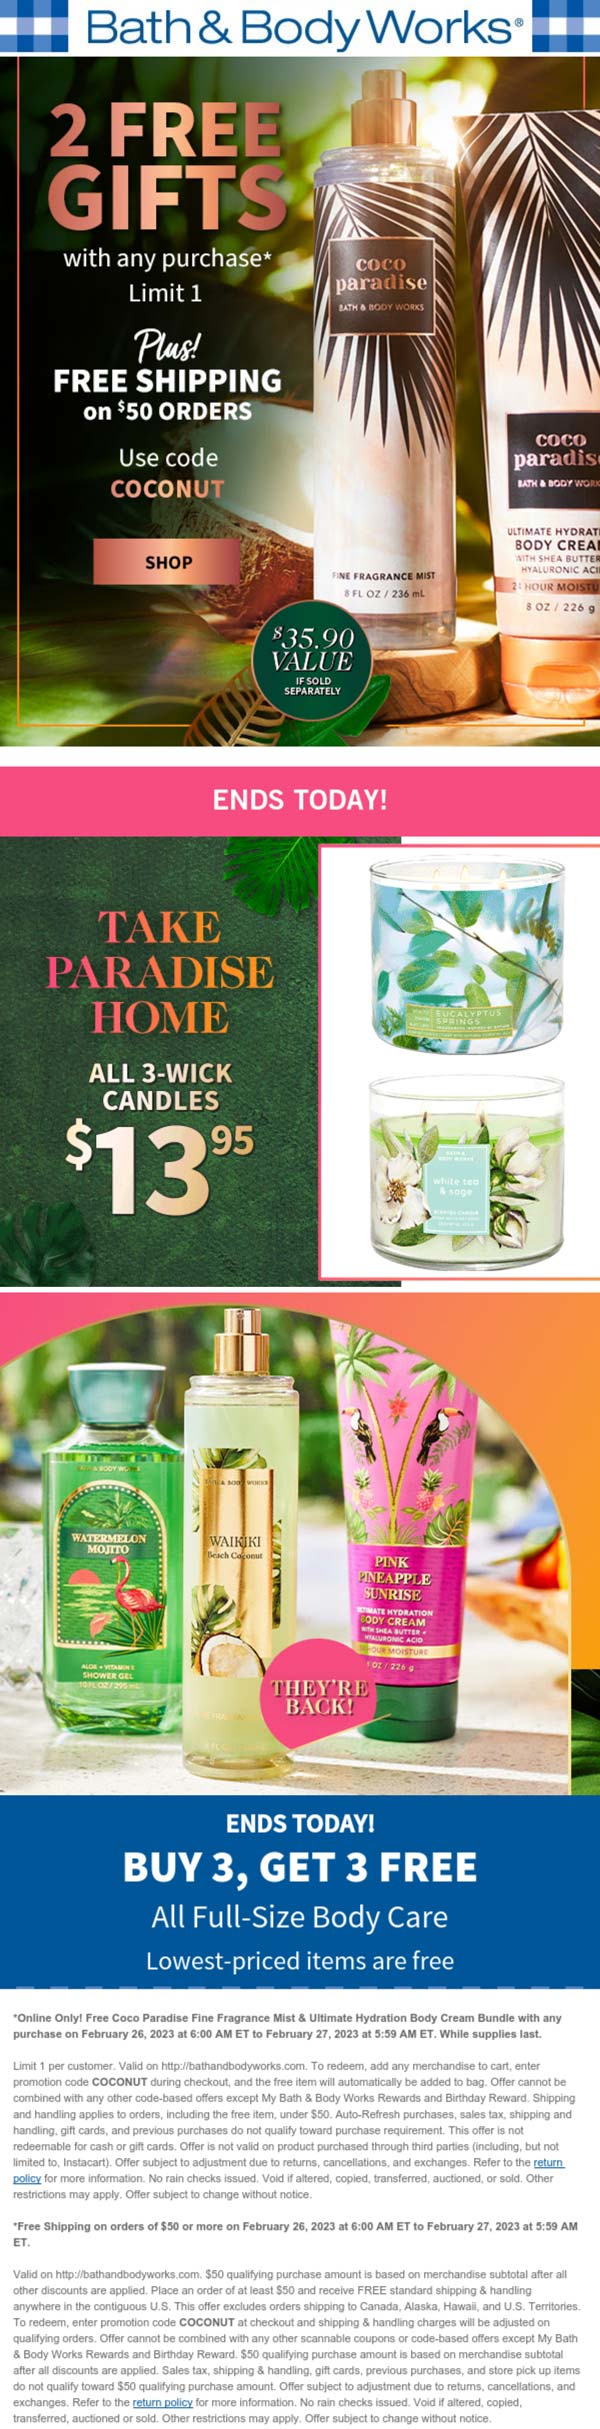 Bath & Body Works stores Coupon  2 free items with any online purchase today at Bath & Body Works via promo code COCONUT #bathbodyworks 